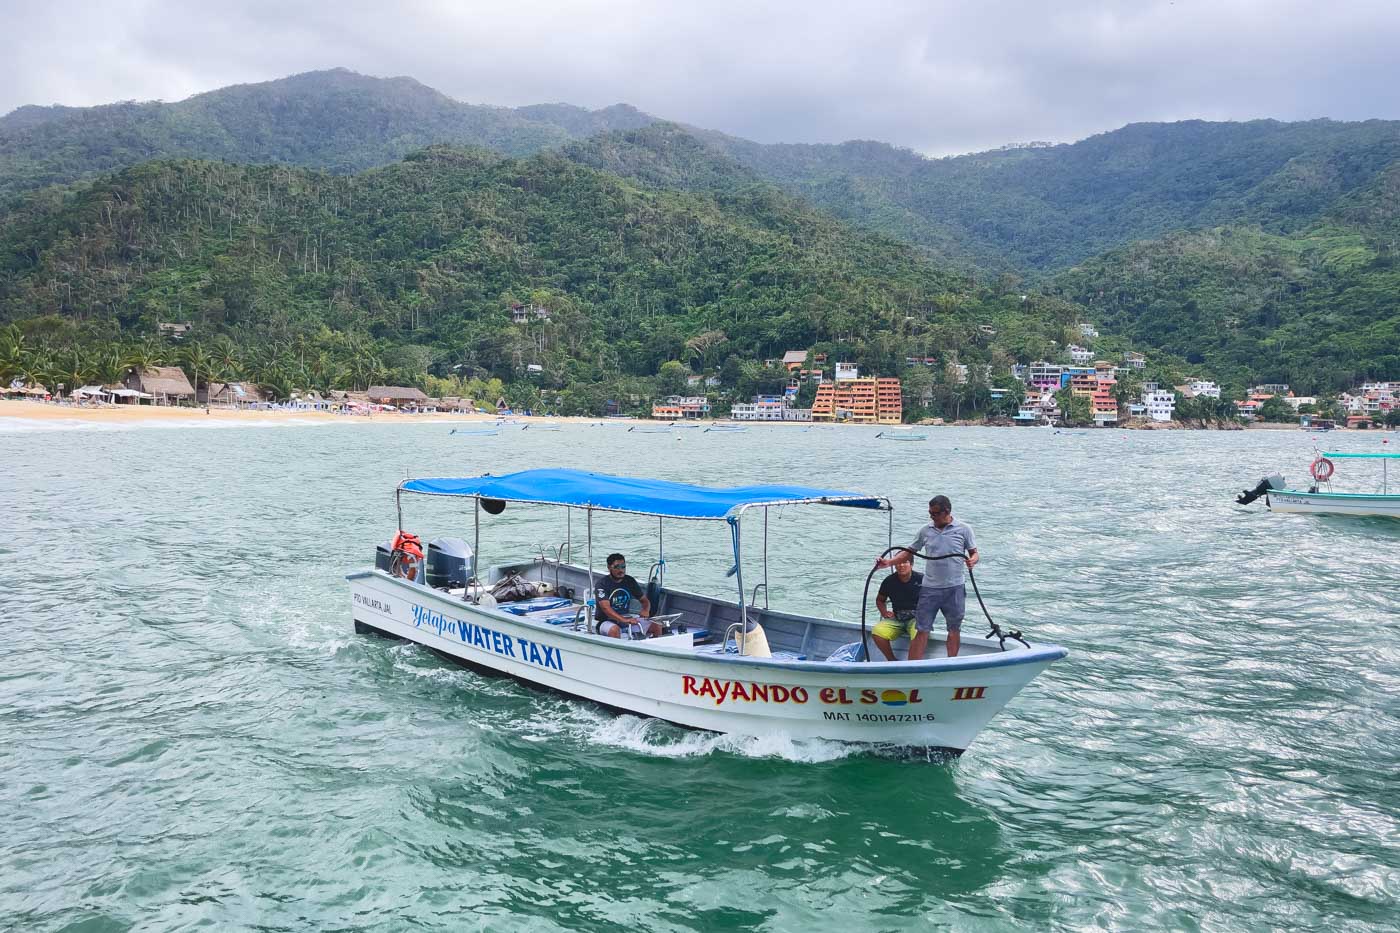 Water taxi carrying passengers amongst the mountains in Yelapa.